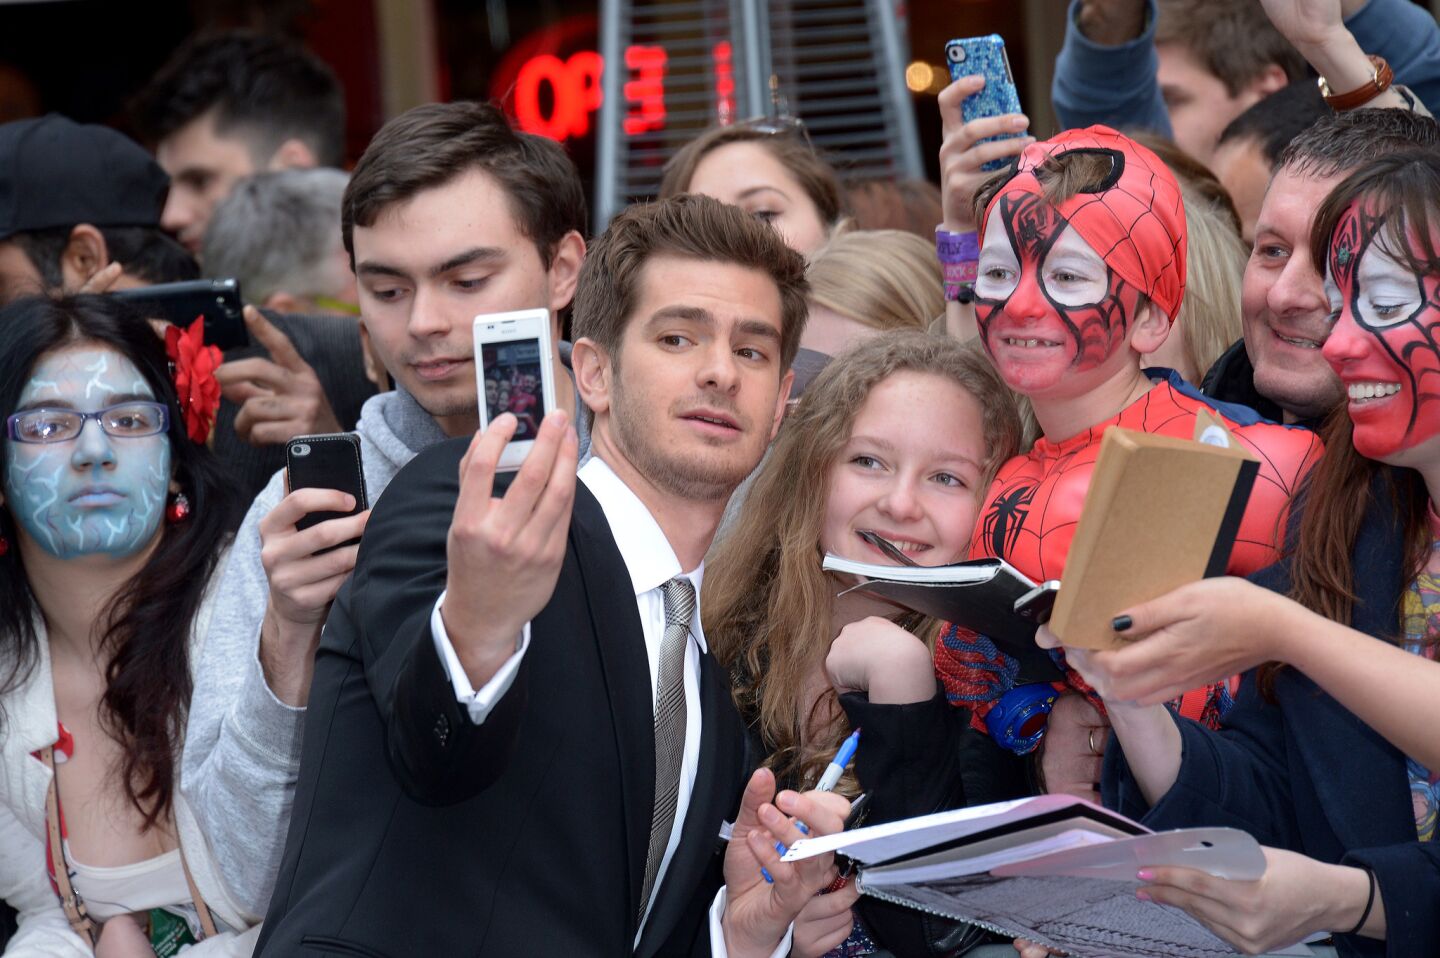 Andrew Garfield takes a selfie with fans as he arrives on the red carpet for the world premiere of "The Amazing Spider-Man 2" in Leicester Square, London, on April 10, 2014.